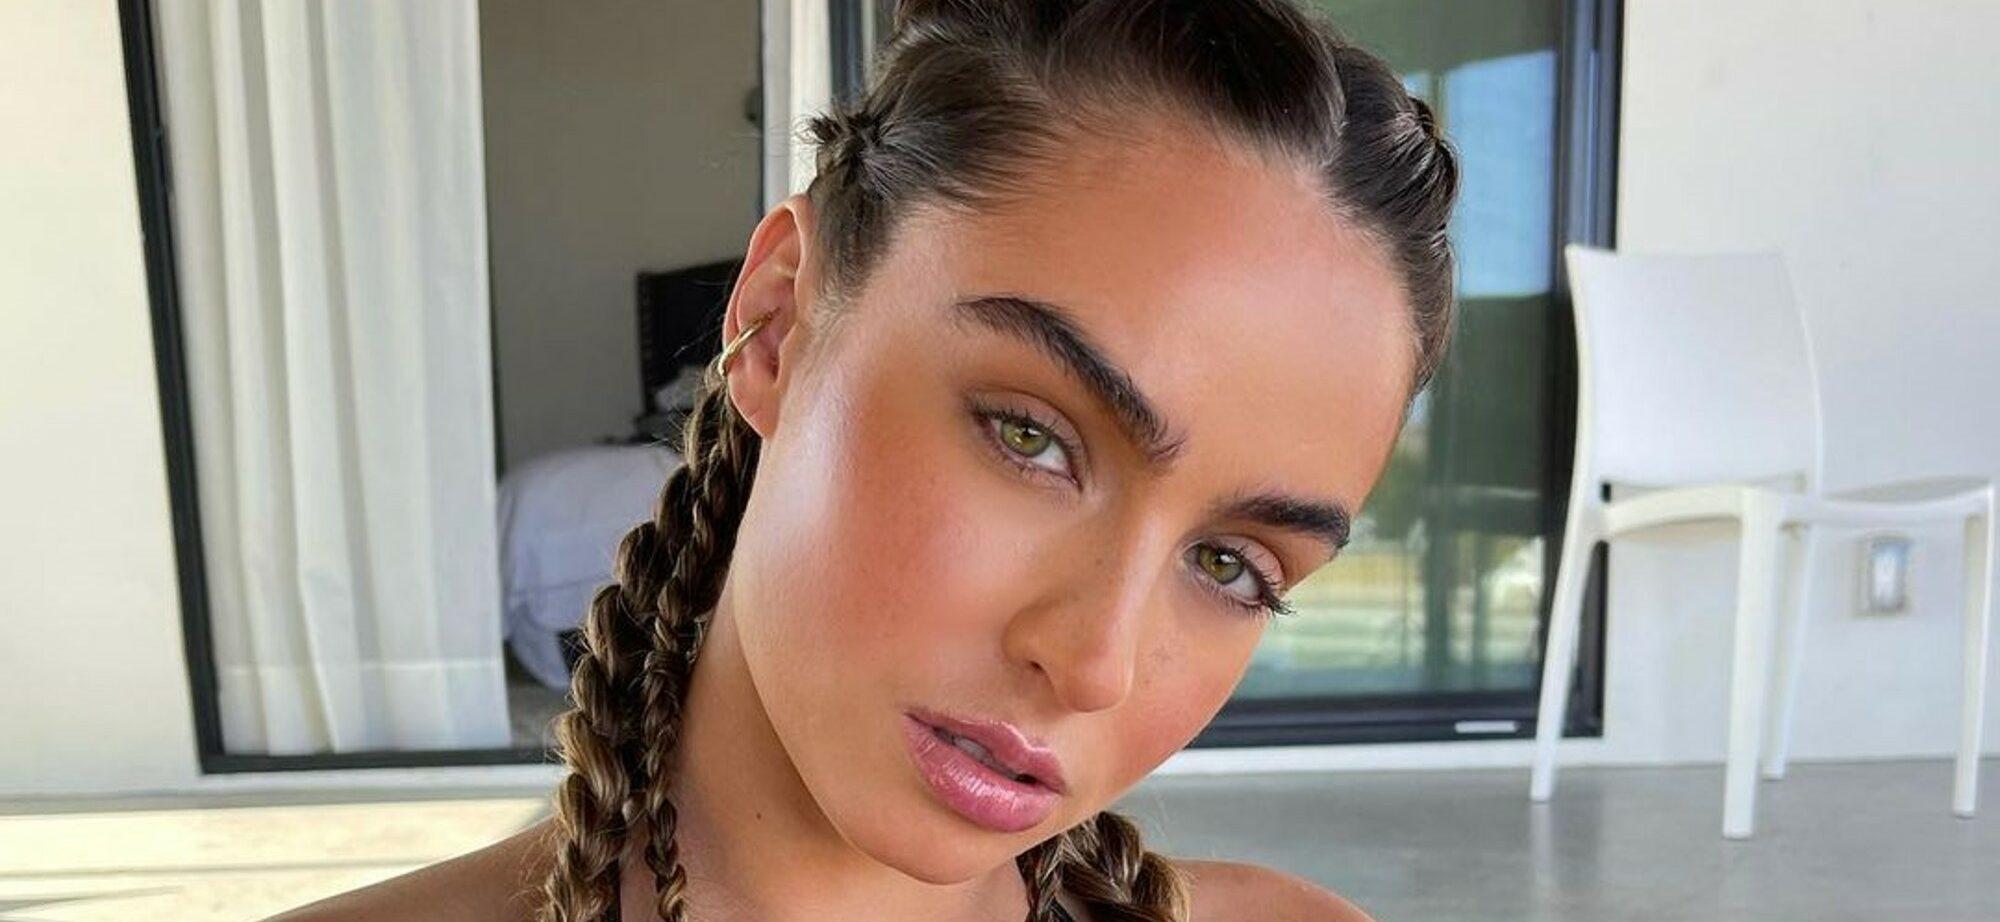 Sommer Ray In Tiny Outfit Says She’s ‘No Barbie.. I’m Wonder Woman’